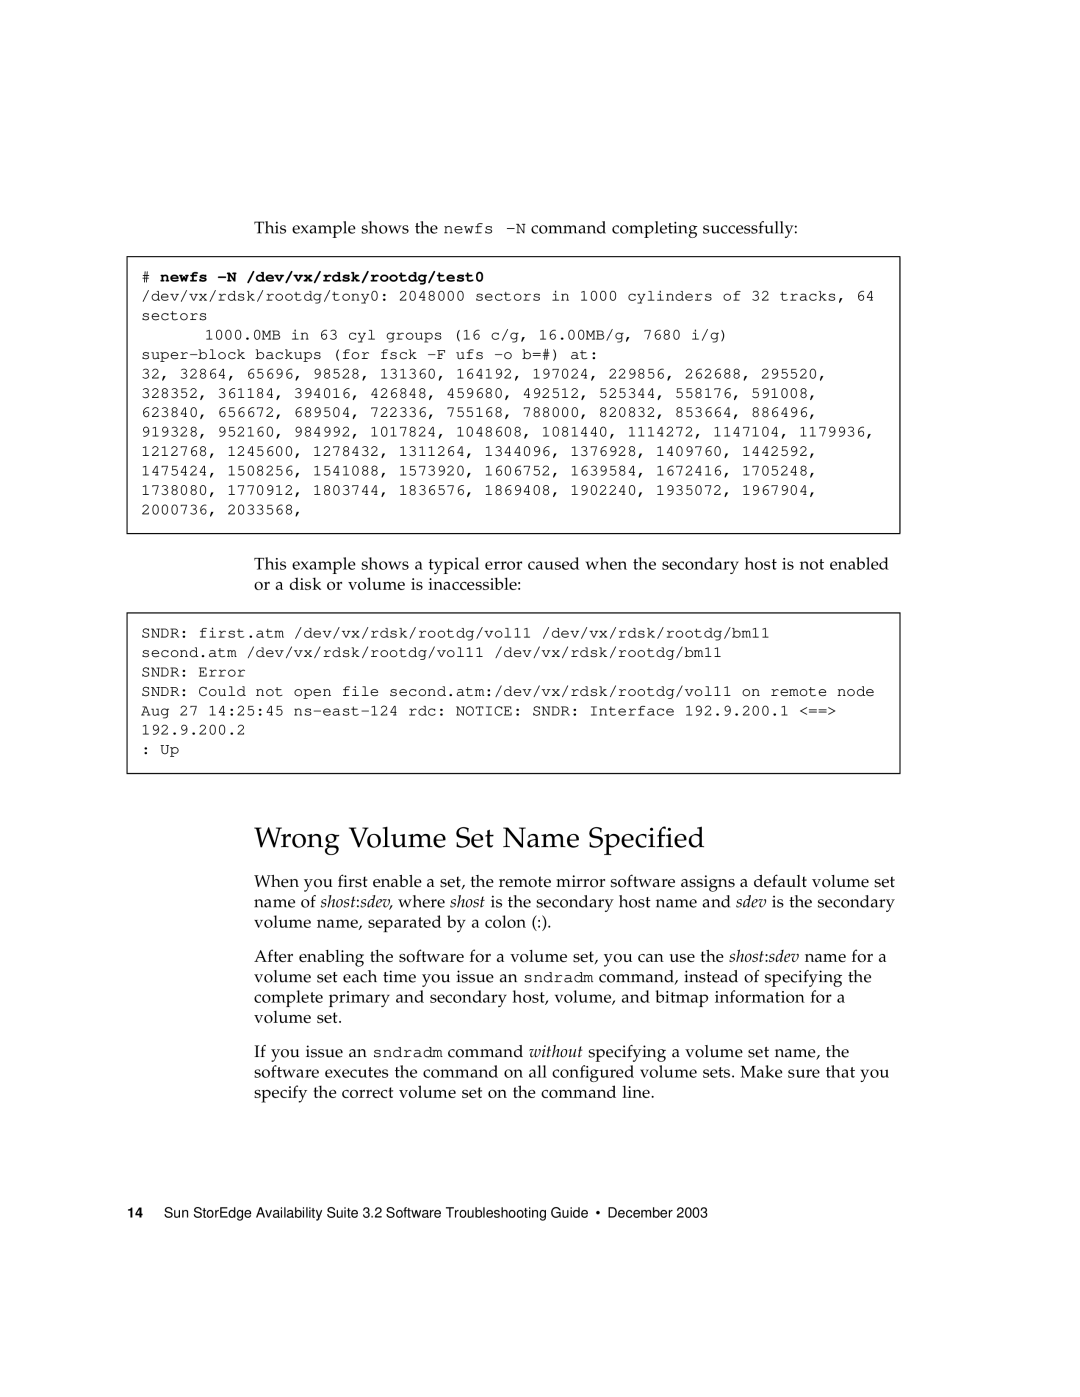 Sun Microsystems 3.2 manual Wrong Volume Set Name Specified, #newfs -N /dev/vx/rdsk/rootdg/test0 